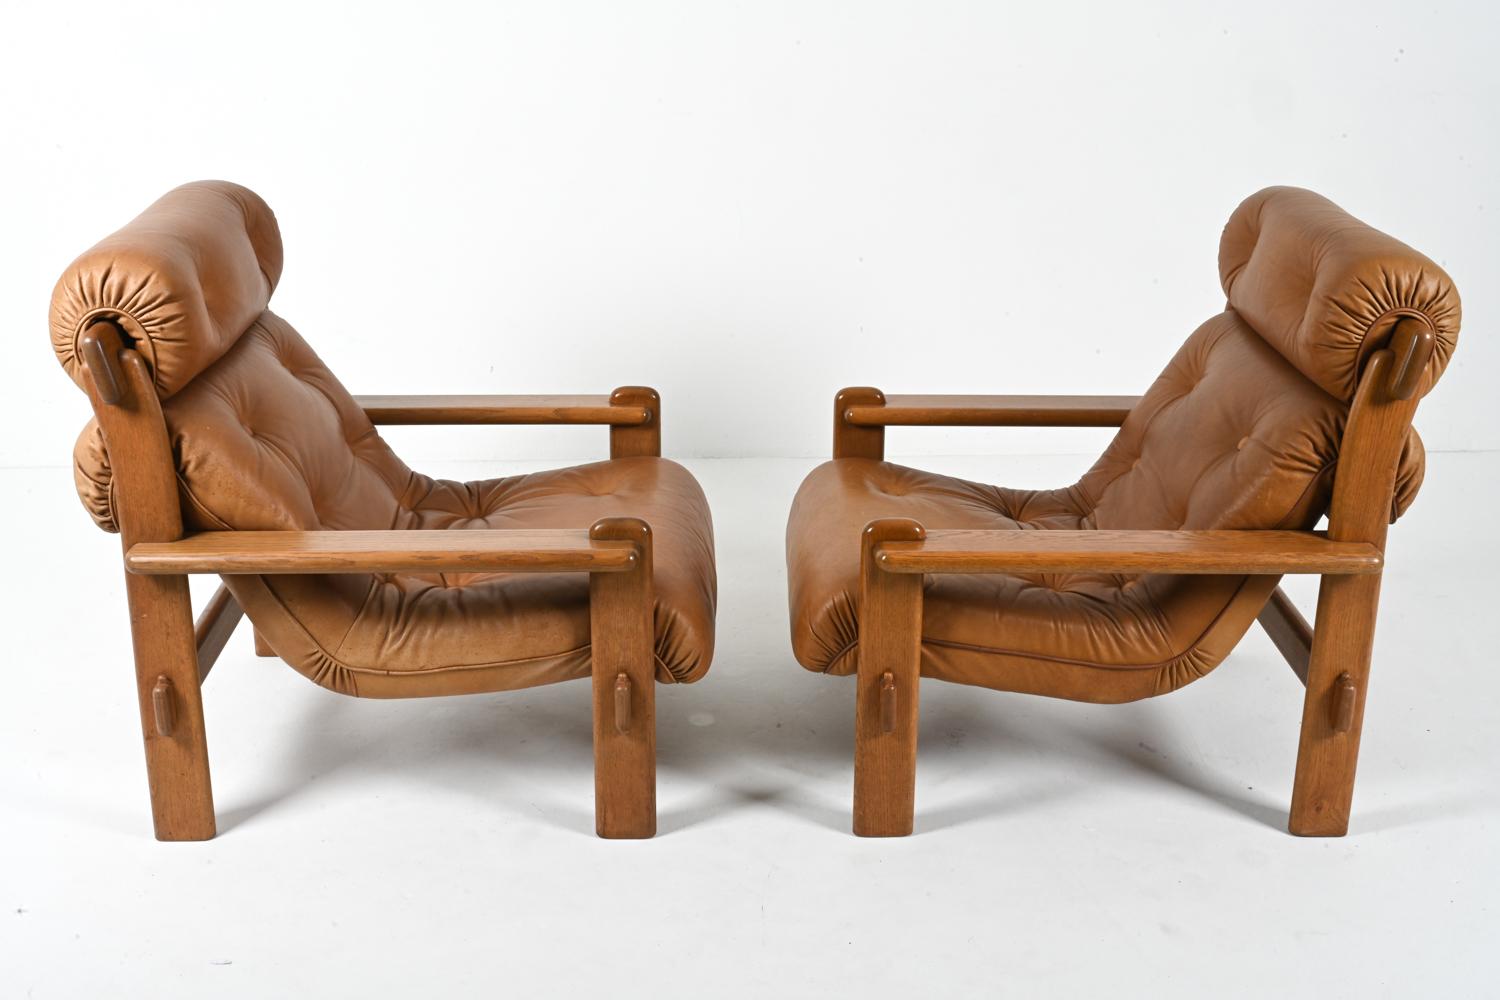 Pair of European Brutalist Armchairs in Oak & Leather, c. 1970's For Sale 12